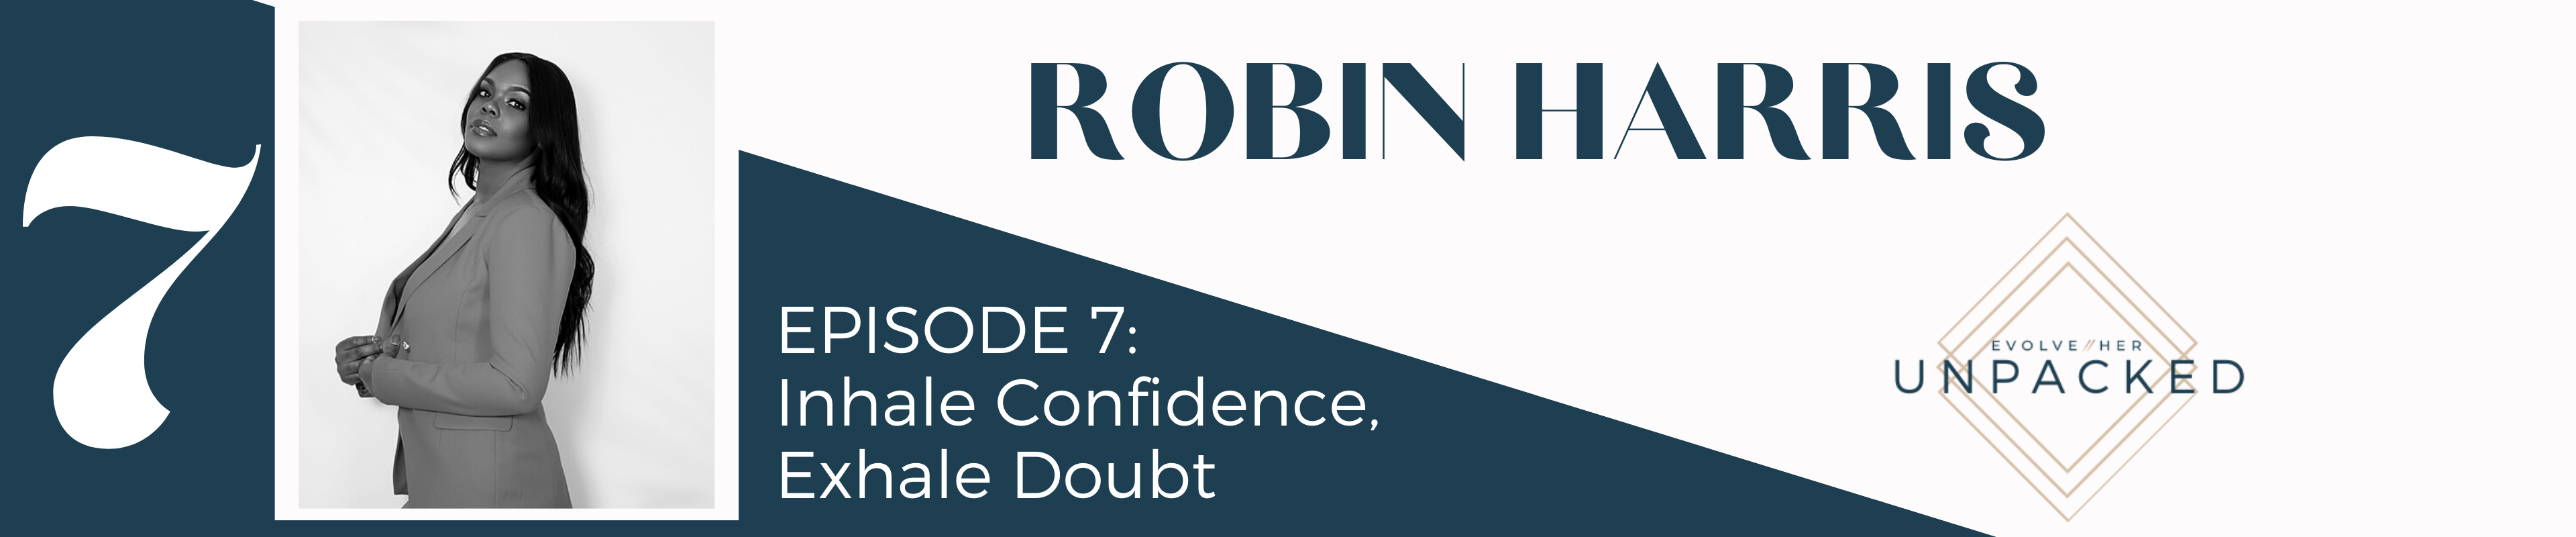 Podcast Page Header Robin Harris